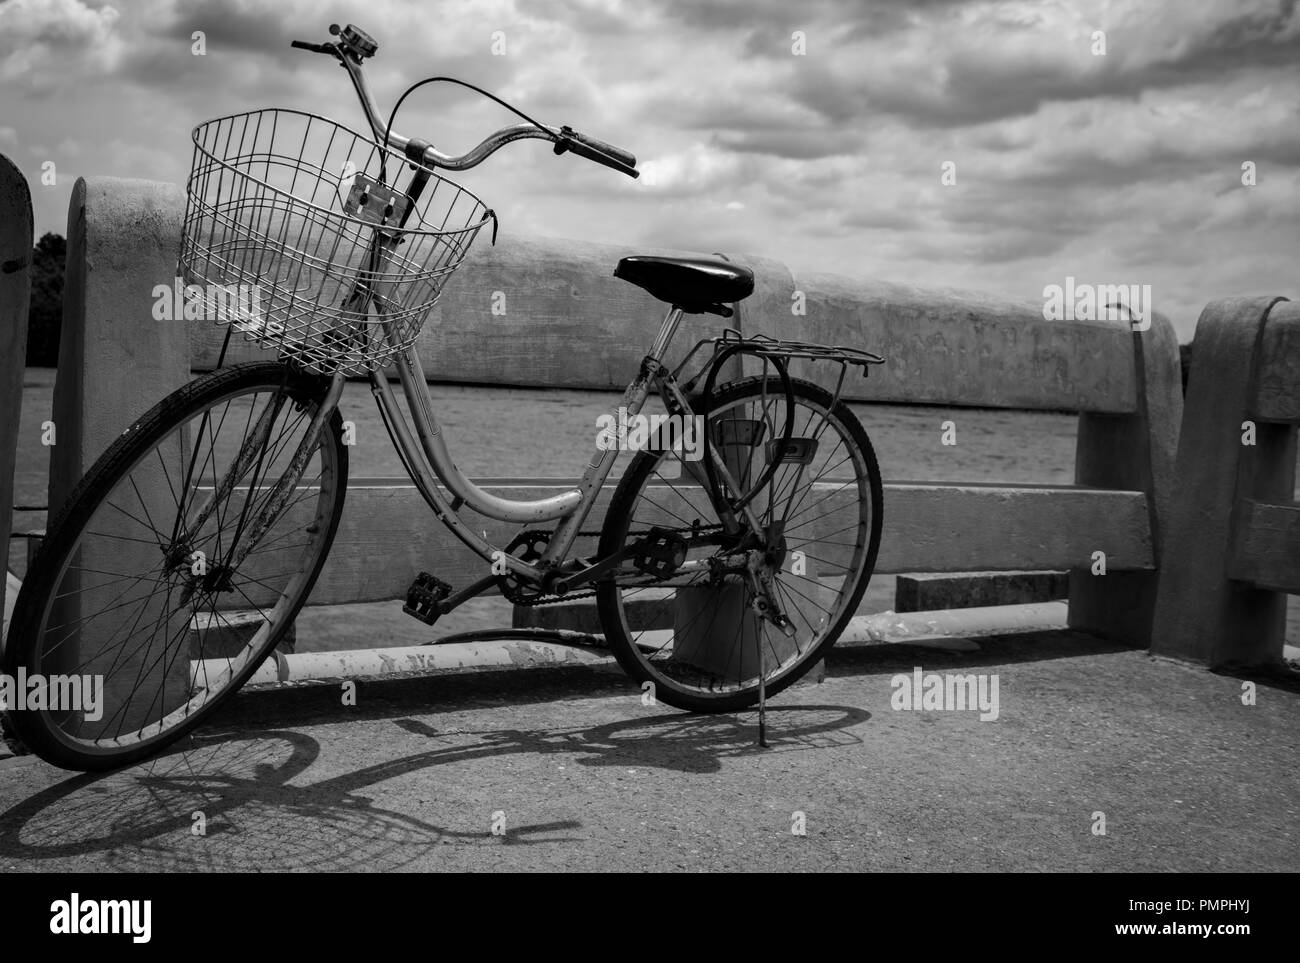 Vintage lonely bicycle parked on concrete road by the river with grey sky and clouds. Travel alone. Lonely life.  Worthless or abandoned bike. Hopeles Stock Photo